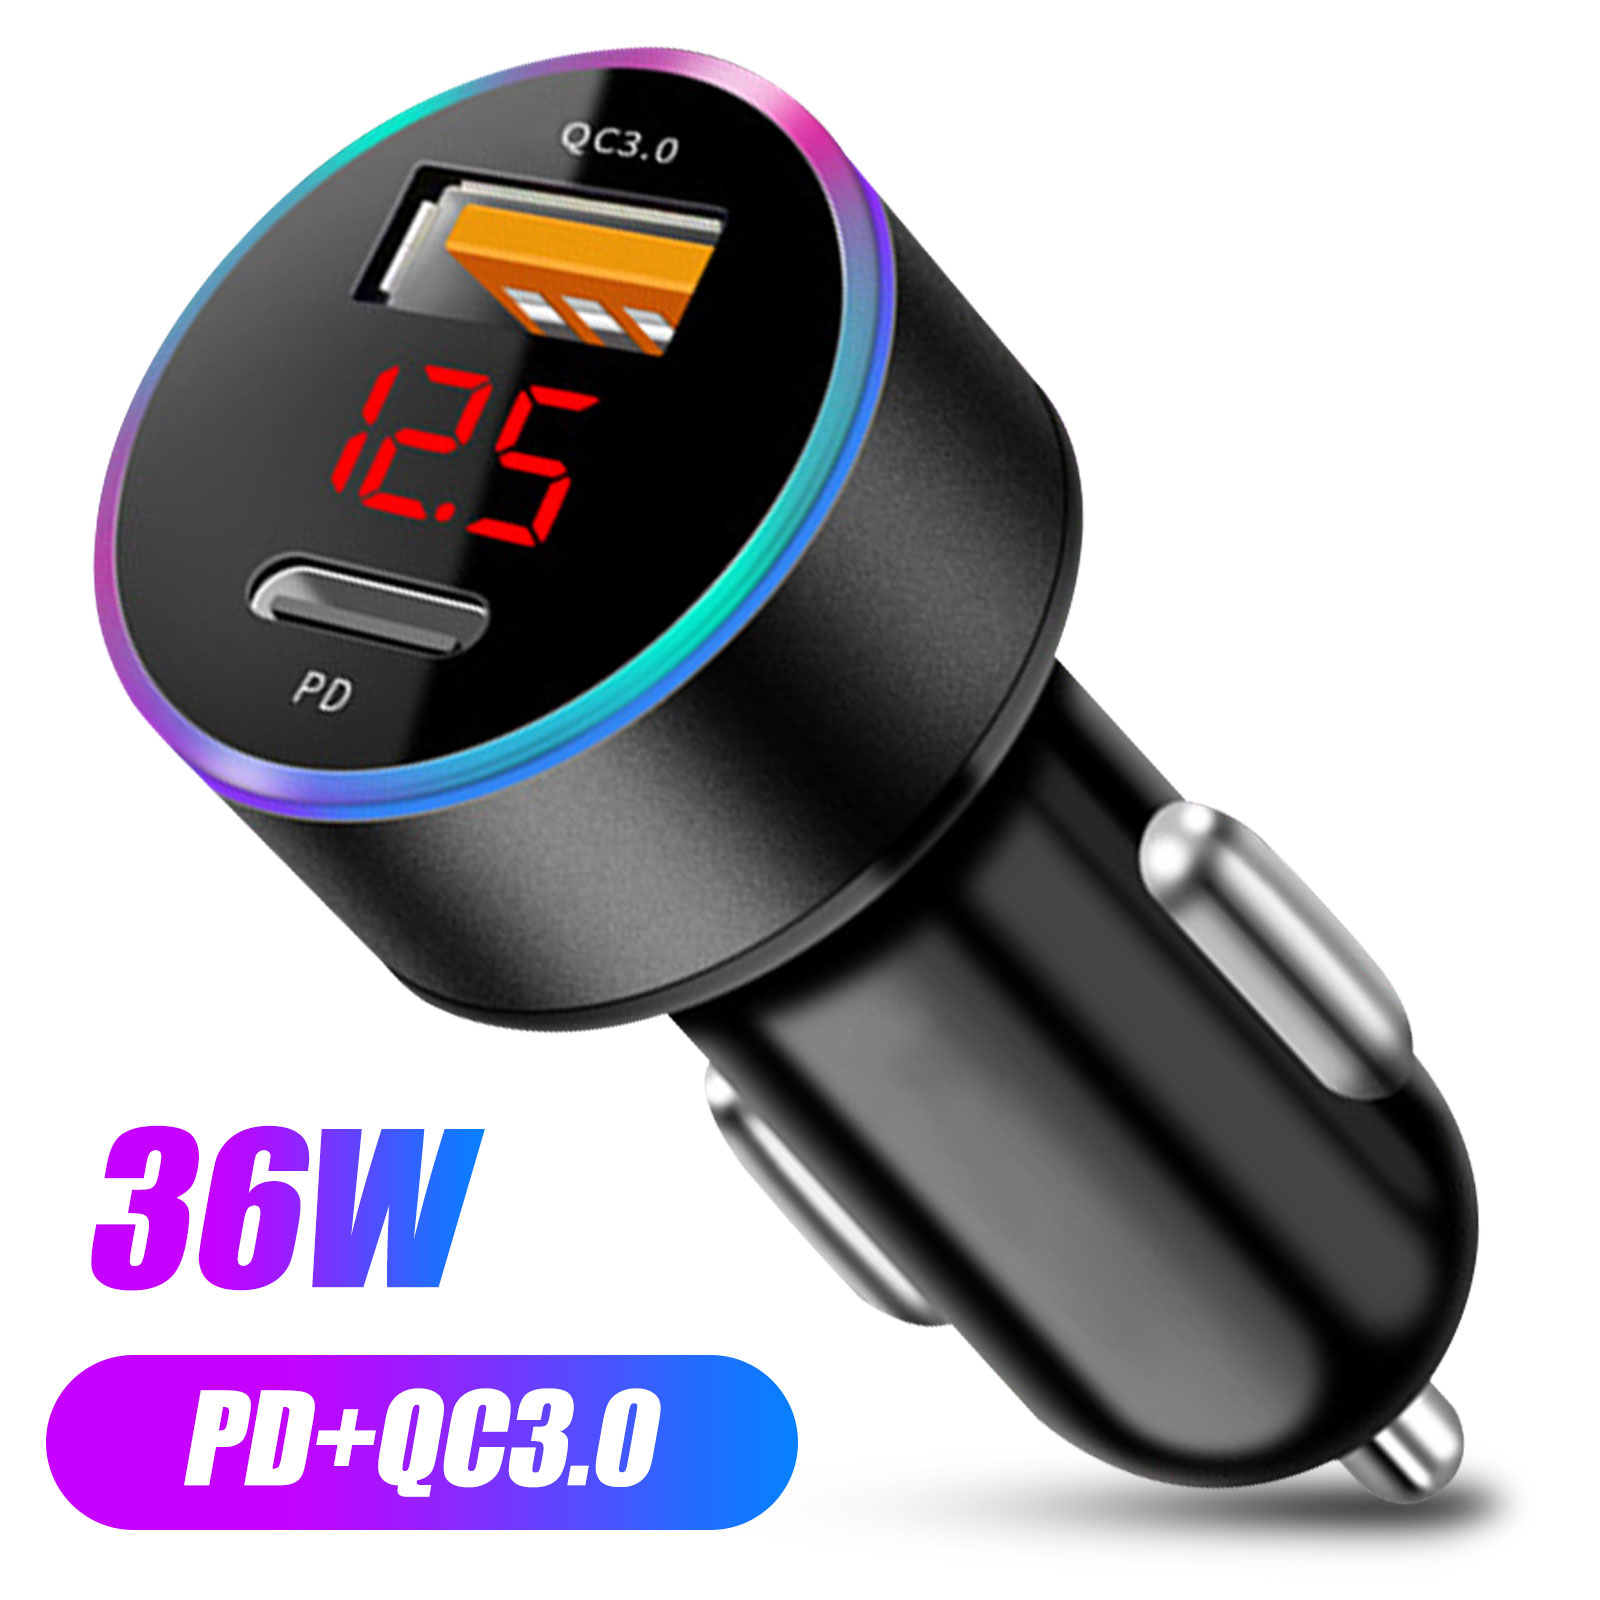 TSV USB C Car Charger, 36W Fast USB Car Charger PD QC 3.0 Dual Port Car Adapter, Mini Alloy USB Charger Compatible with iPhone 12, 12 Mini, 12 Pro, 12 Pro Max, 11 Pro Max, Pixel, Samsung - image 1 of 9